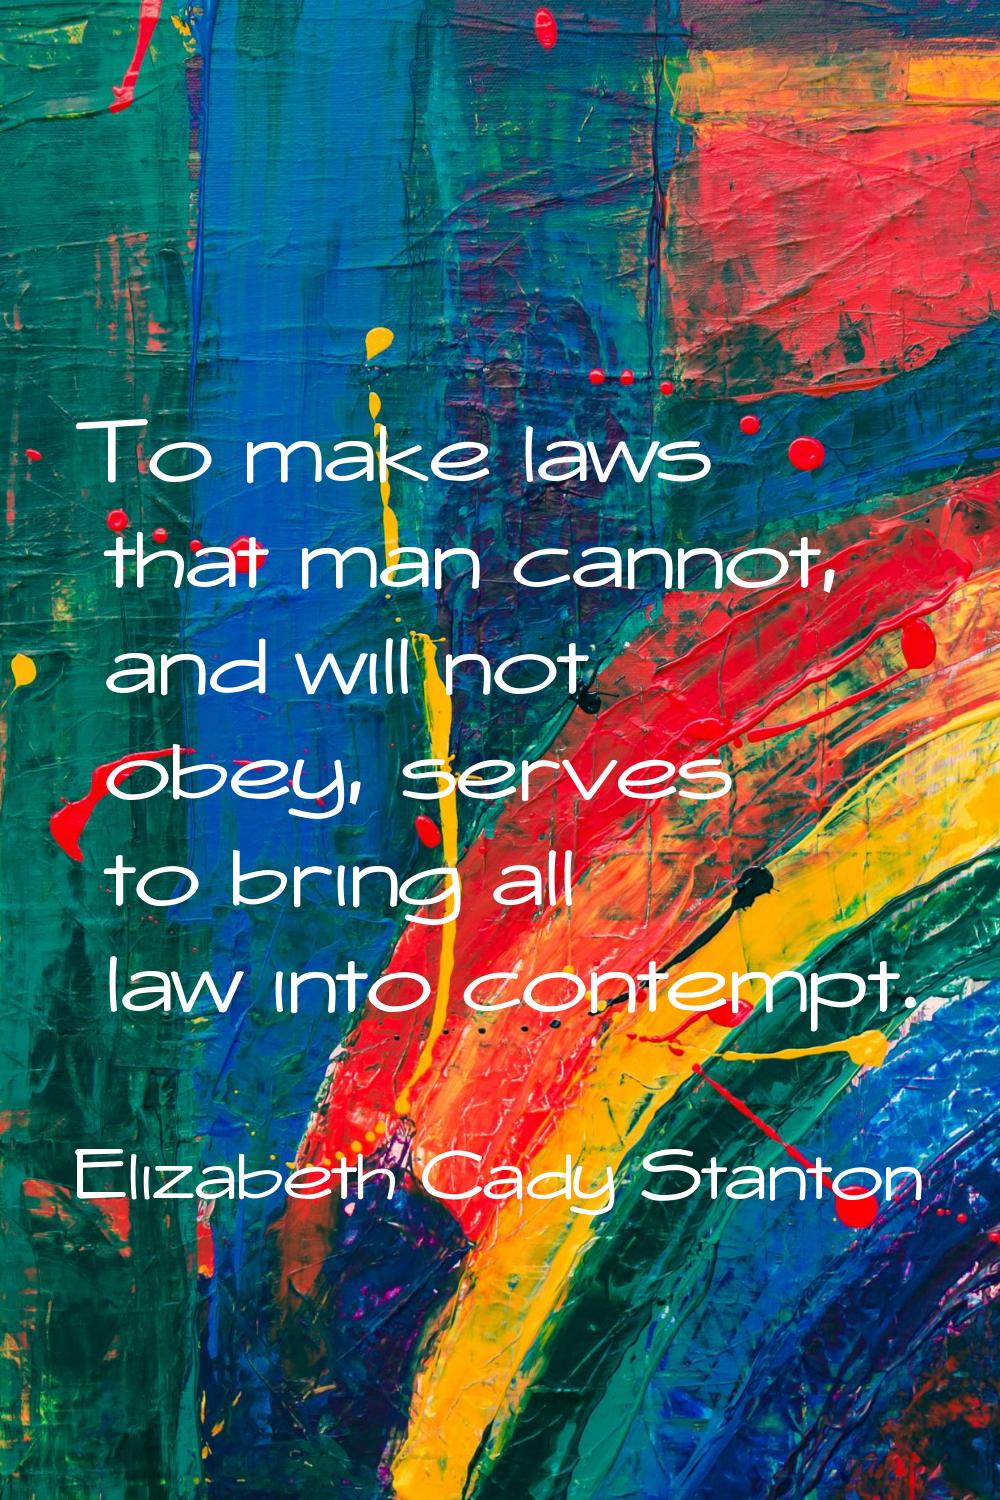 To make laws that man cannot, and will not obey, serves to bring all law into contempt.